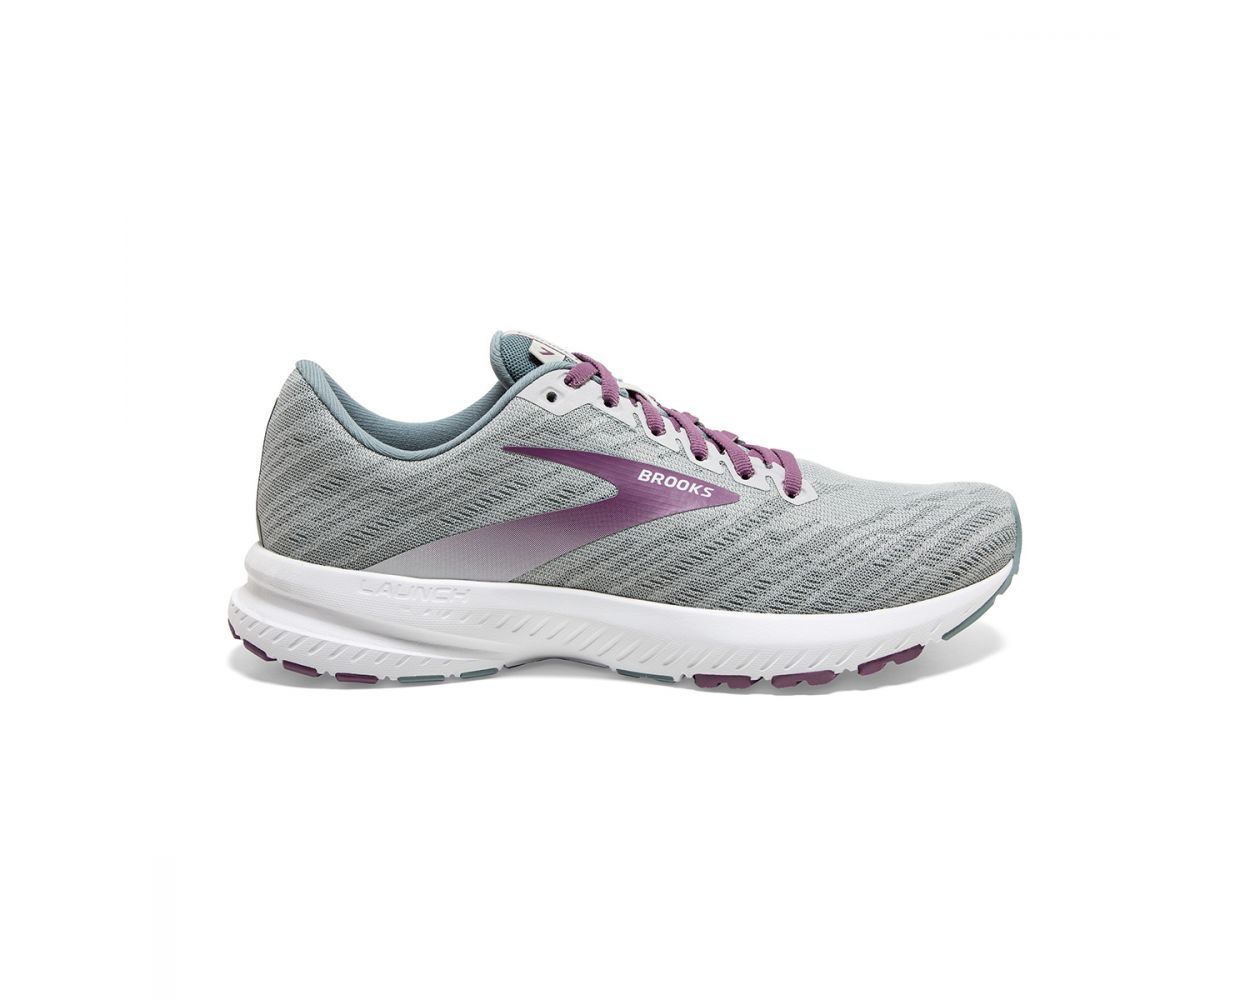 Brooks Launch 7 Running Shoes $59.99 + Free S/H at fit2run.com